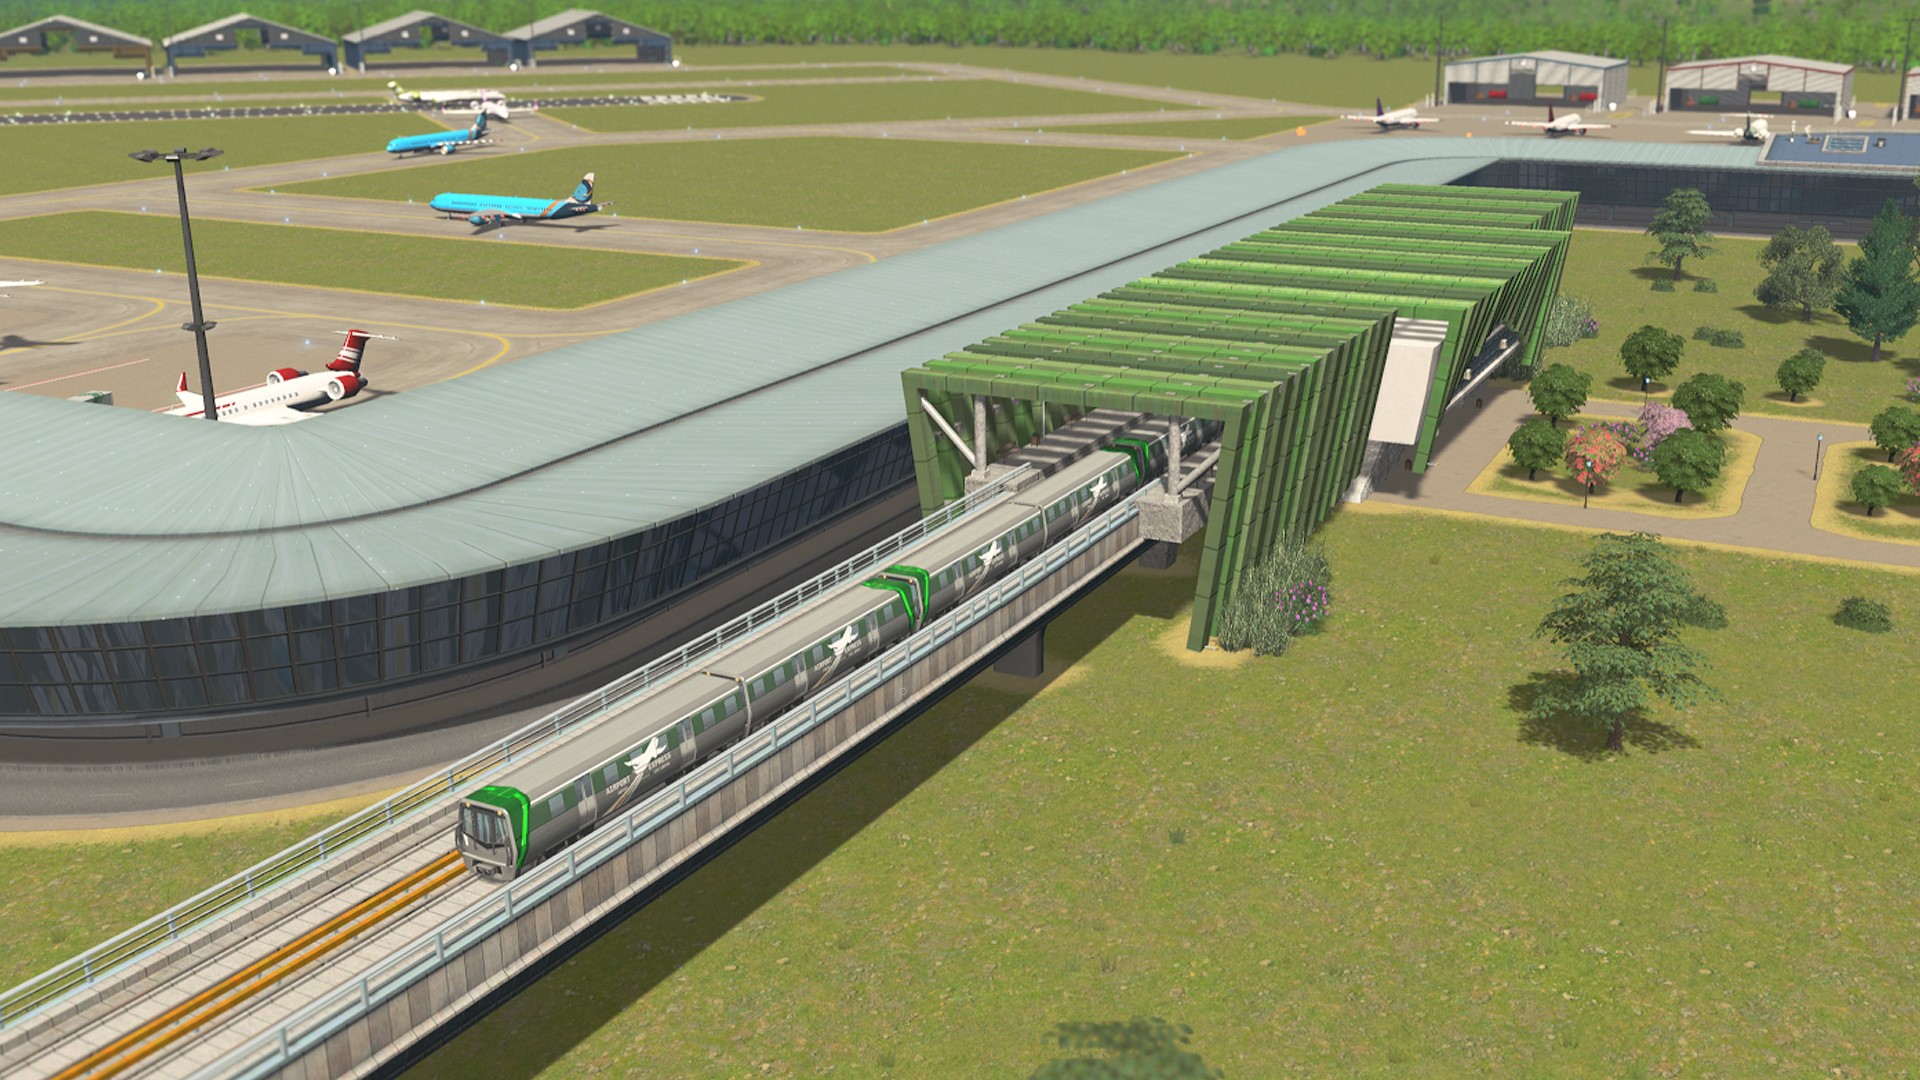 Cities: Skylines Airports DLC adds new high-capacity trains and buses